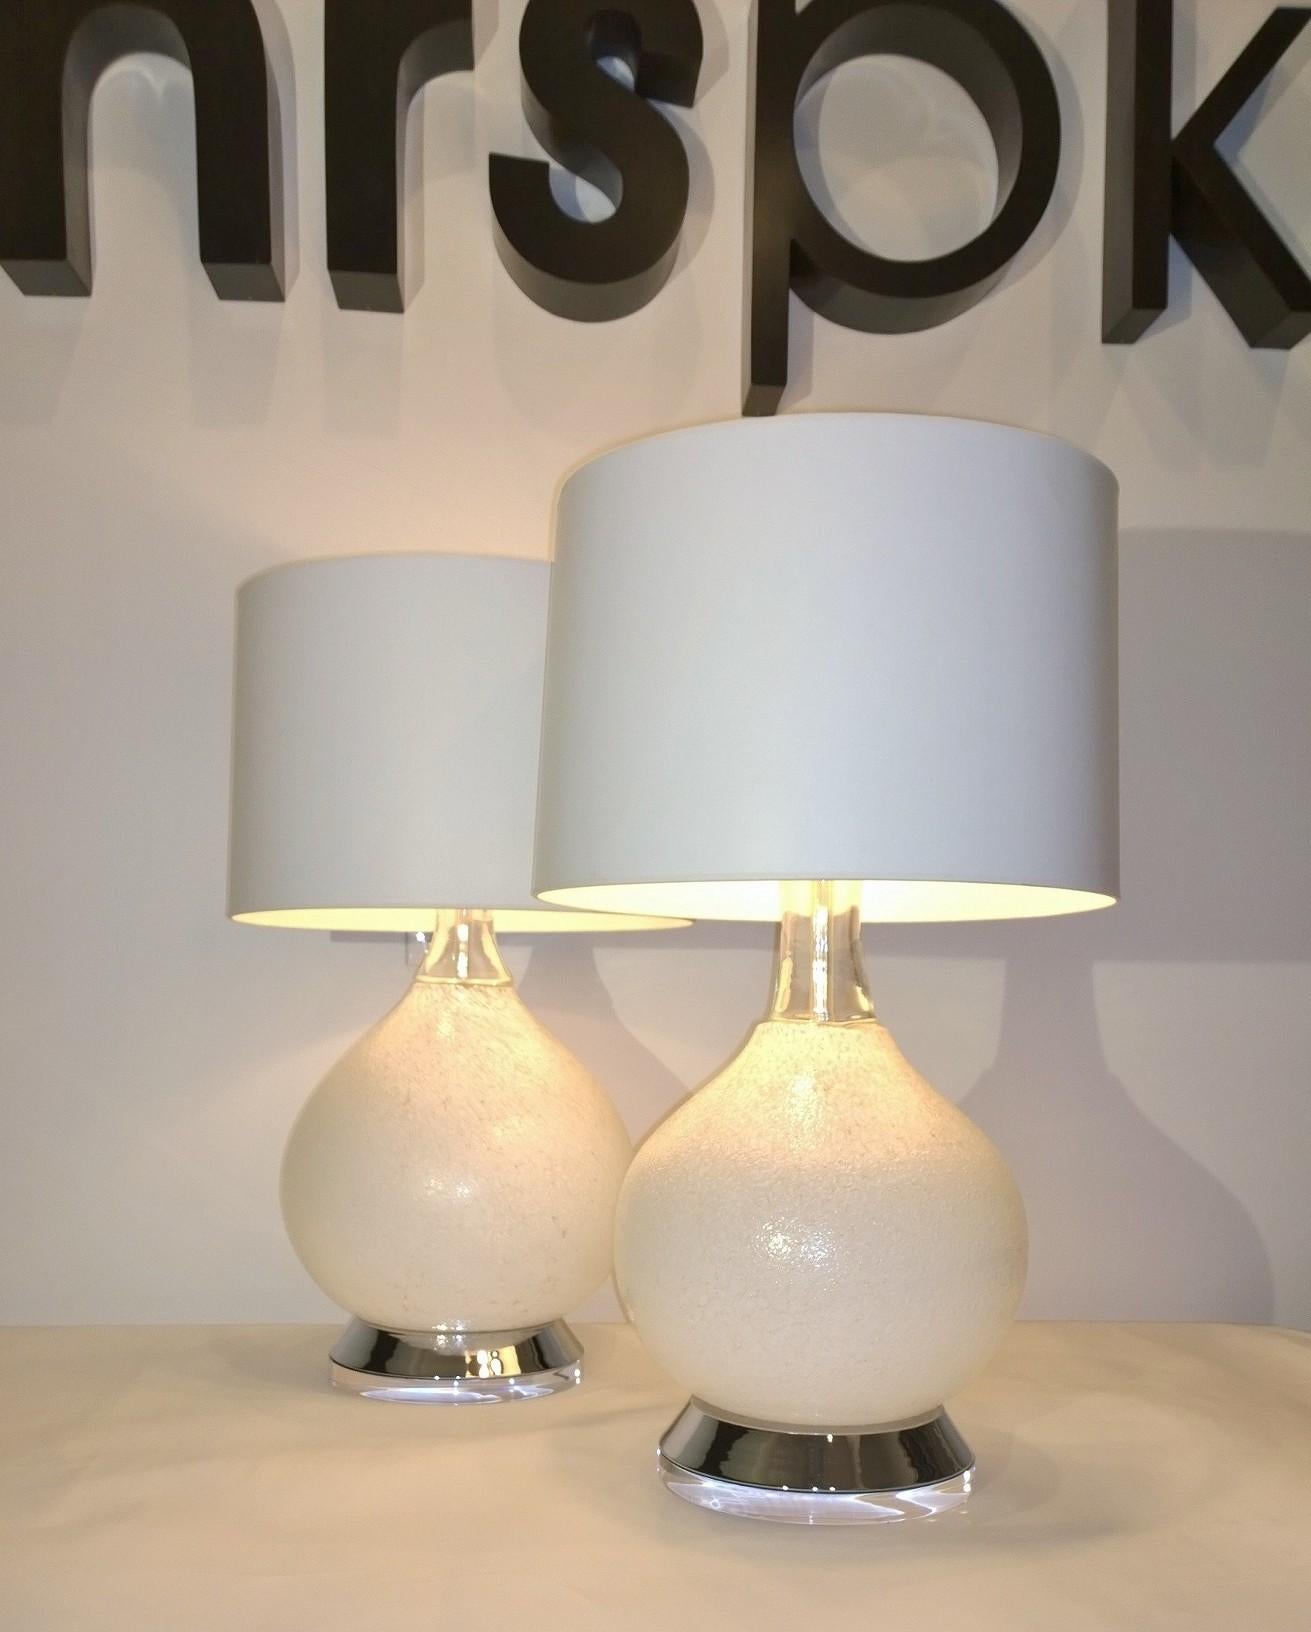 Offered is a pair of Mid-Century Modern Italian Vistosi white textured and clear Murano glass with chrome and Lucite base table lamps. The round surface of the lamp is flecked in white which adds an extra wow with the chrome flared base with thick